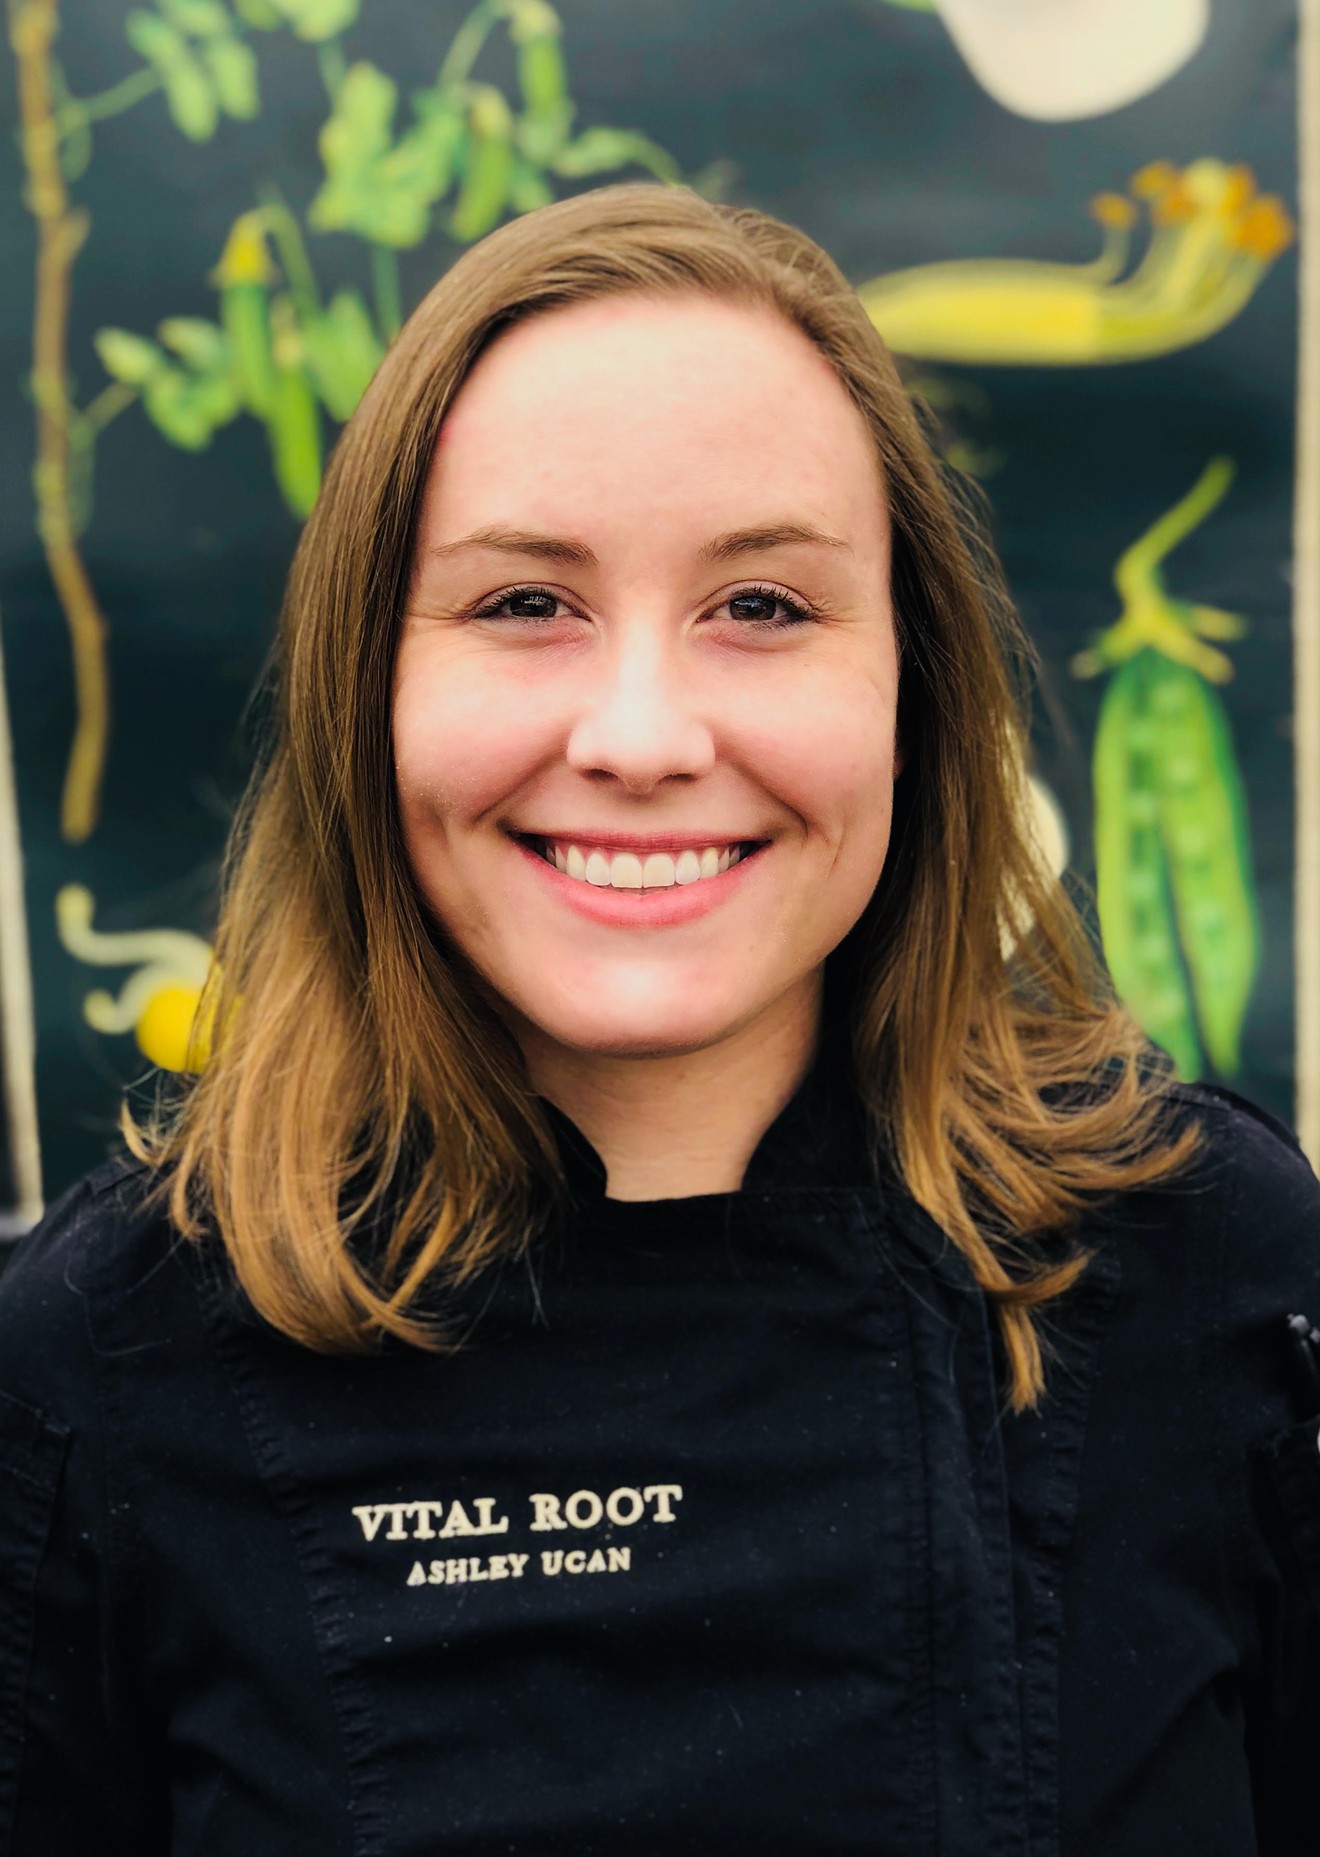 Ashley Ucan was recently named executive chef at Vital Root.